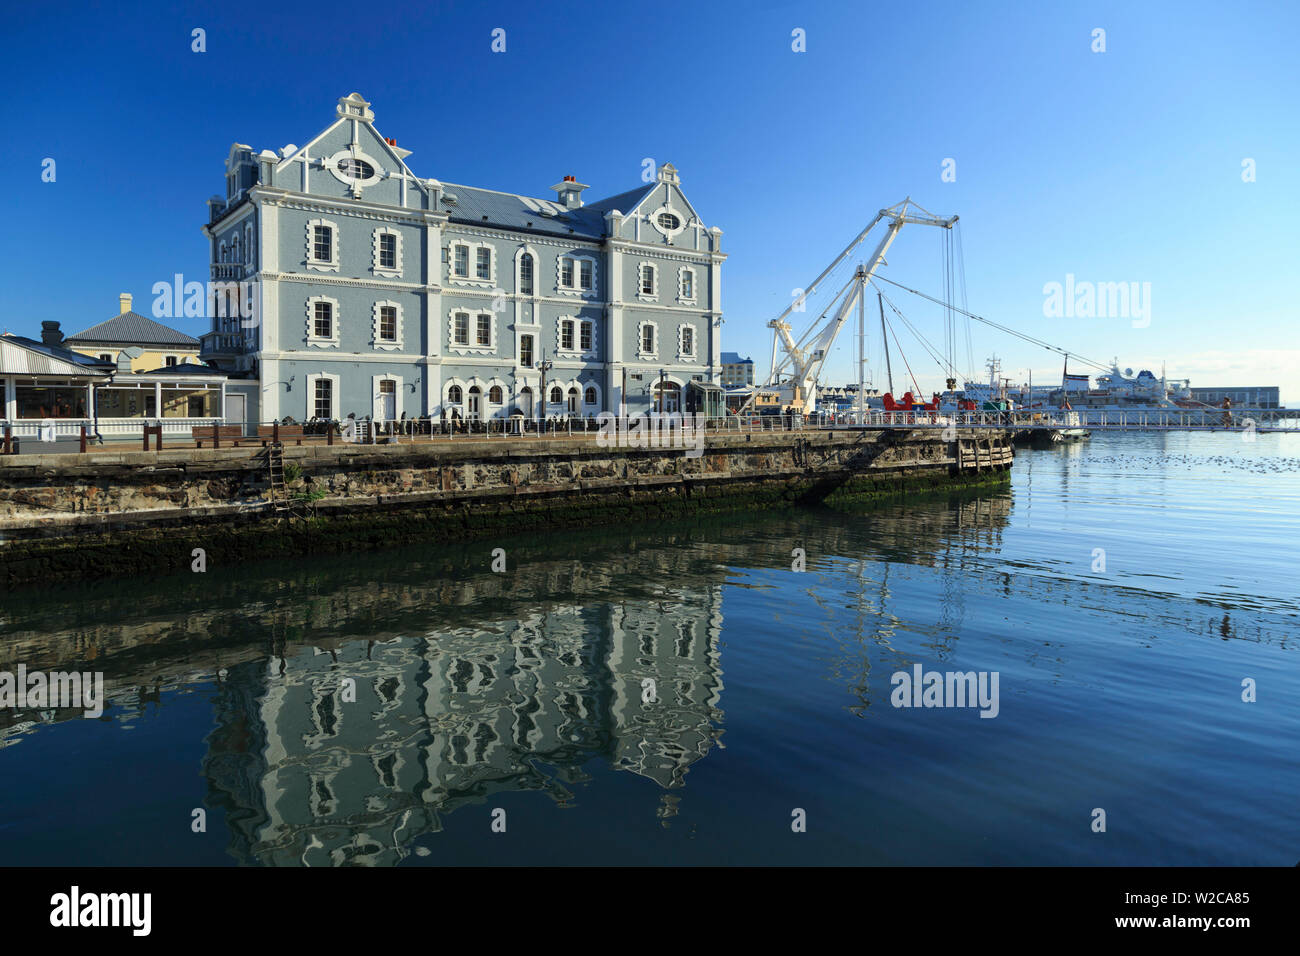 South Africa, Western Cape, Cape Town, V&A Waterfront, Historic African Trading Port Building Stock Photo